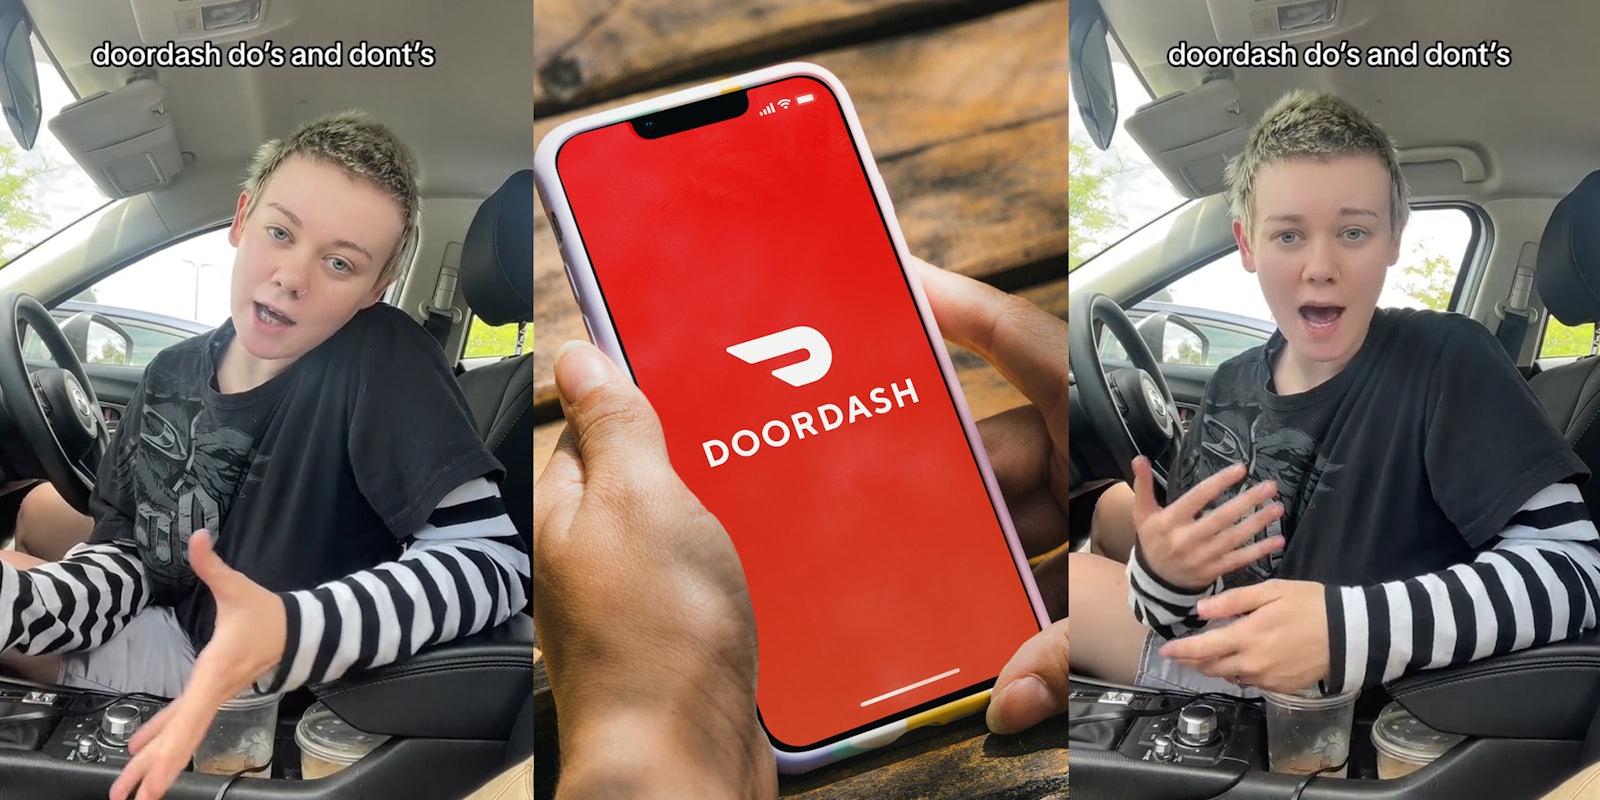 DoorDash driver speaking in car with caption 'doordash do's and don'ts' (l) DoorDash on phone screen in hands in front of wooden background (c) DoorDash driver speaking in car with caption 'doordash do's and don'ts' (r)